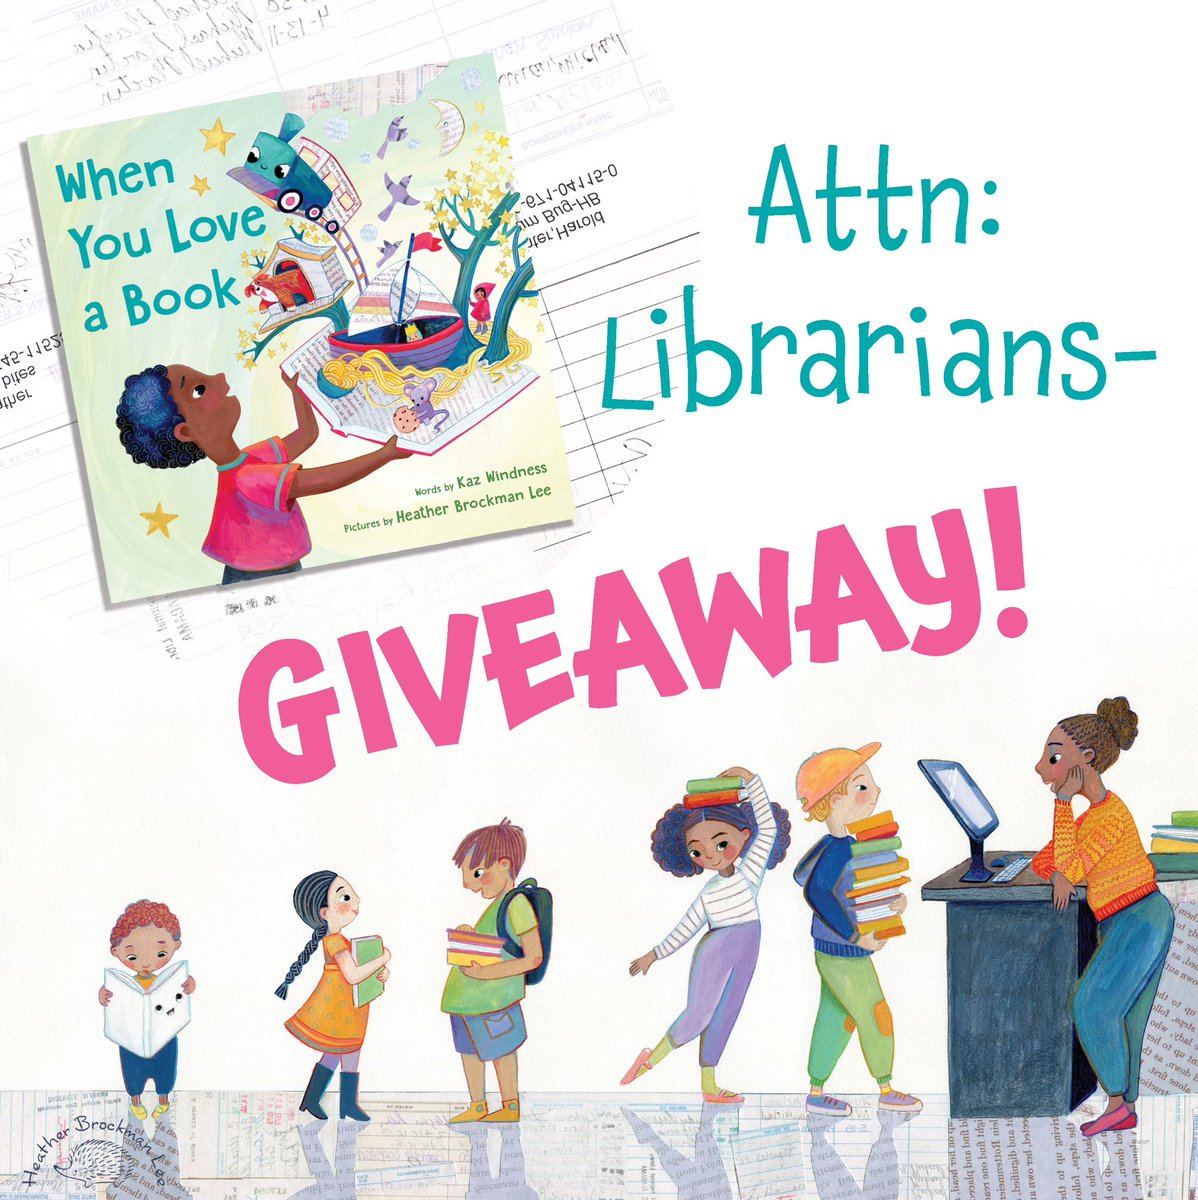 When you love a Librarian- We do! we are giving away a copy of our new book, signed by both, to a wonderful librarian! To enter our giveaway, Like, Share and Comment. Not a librarian? Please tag your favorite librarians here so they can have a chance to win! #welovelibrarians